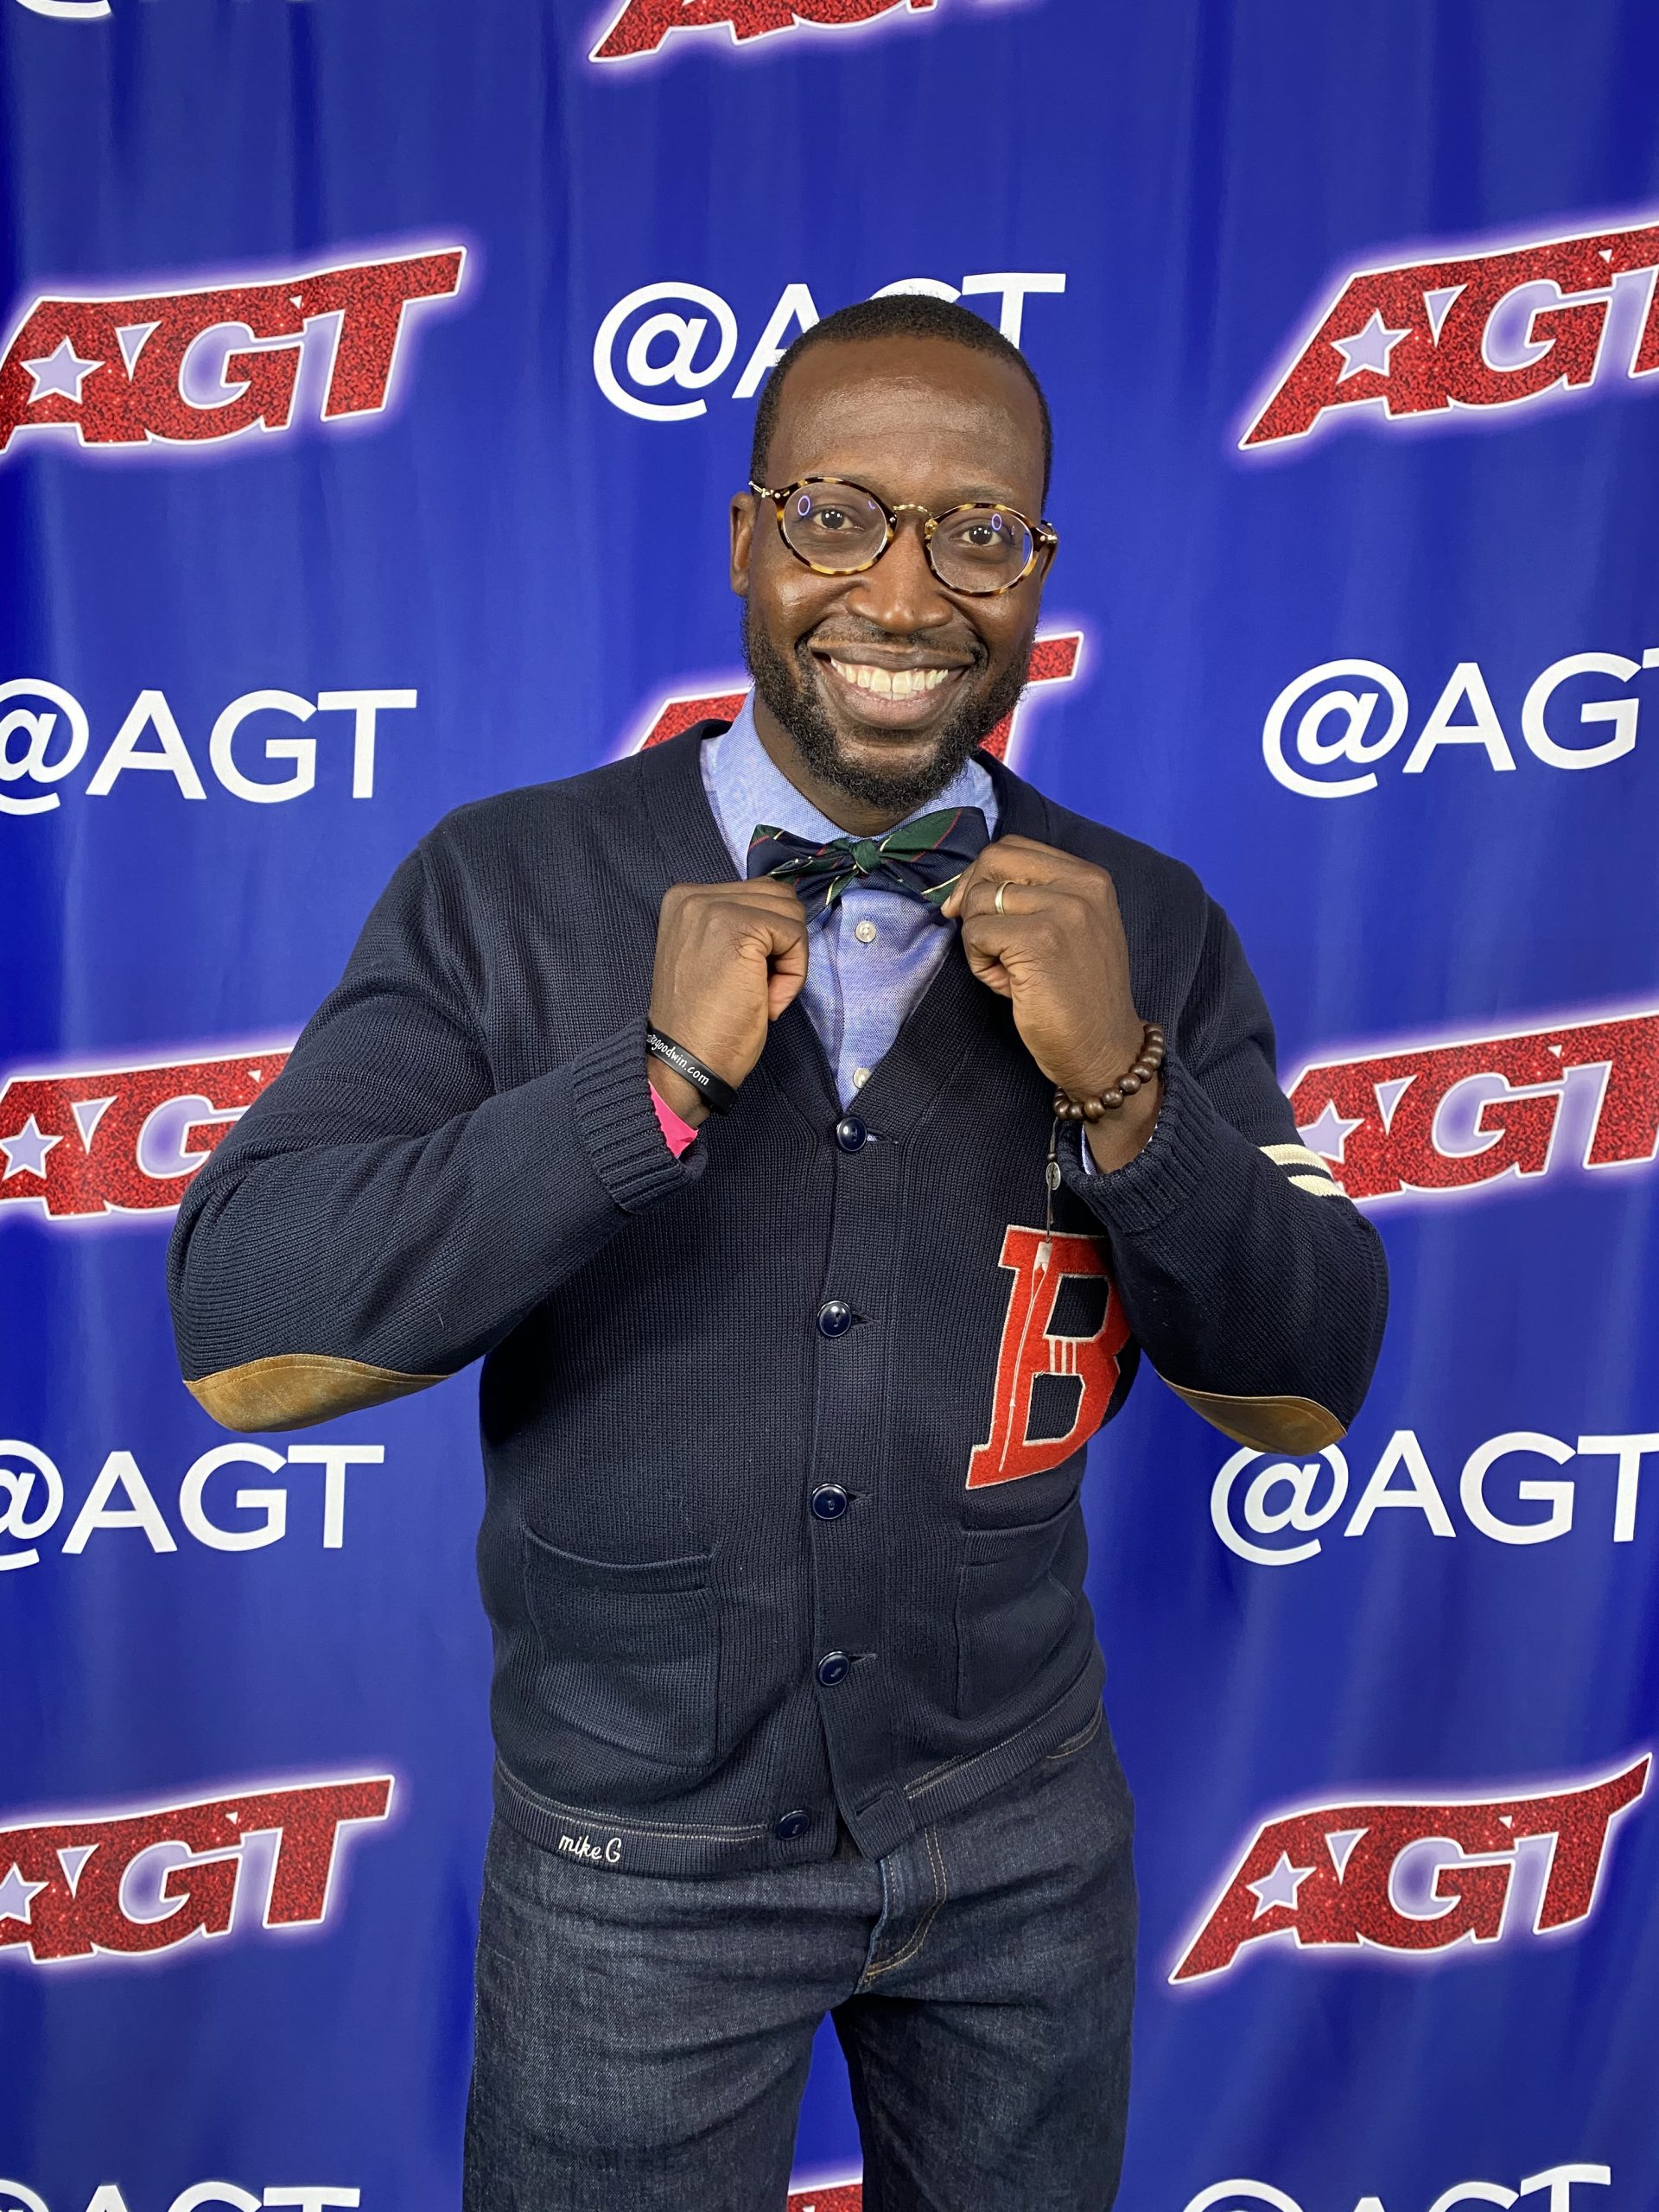 Mike submitted an audition tape for his stand-up comedy routine to America’s Got Talent in January 2021. His acceptance came quickly, and he was flown to Pasadena for a two-minute act in his signature bowtie and sweater ensemble, where he 
got thumbs up from all four judges! Photography courtesy of Asa Pressley